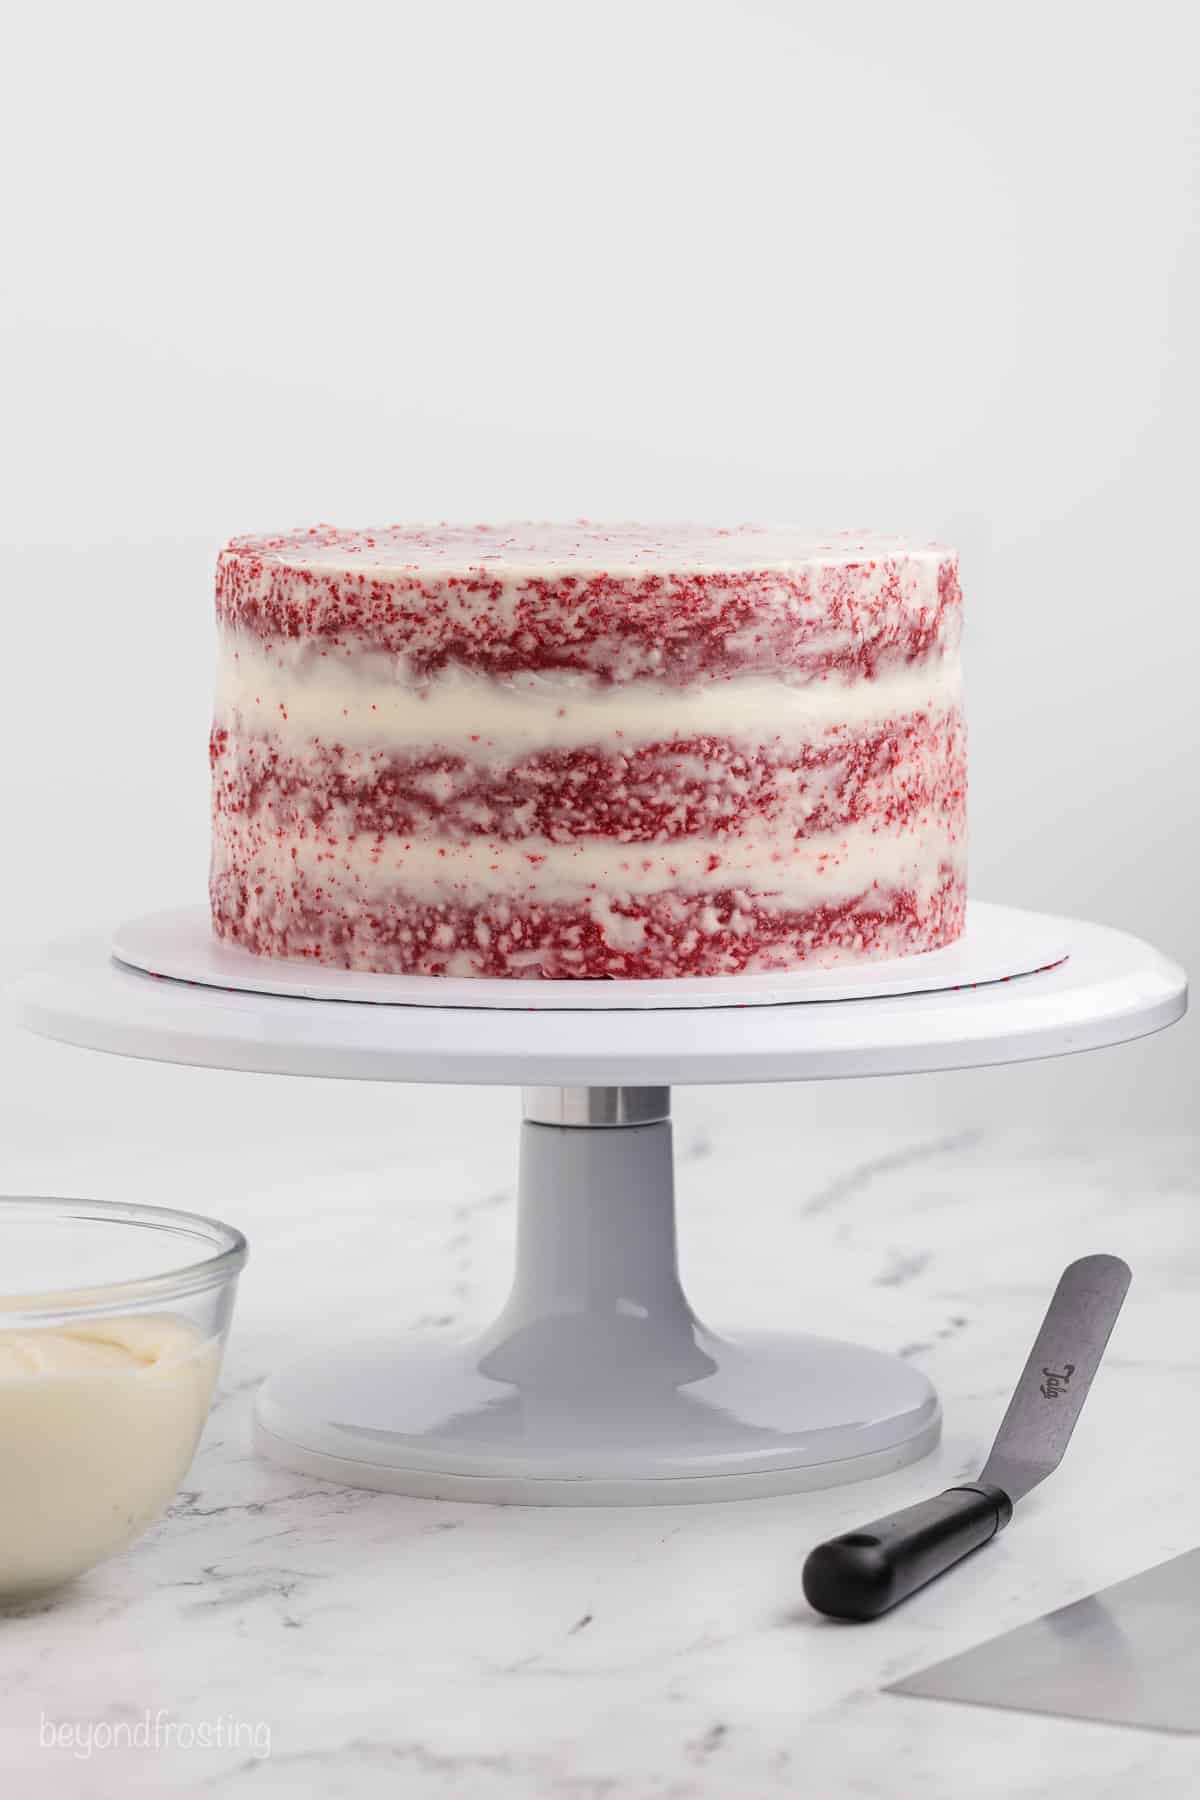 Red velvet layer cake with a crumb coat on a cake stand.